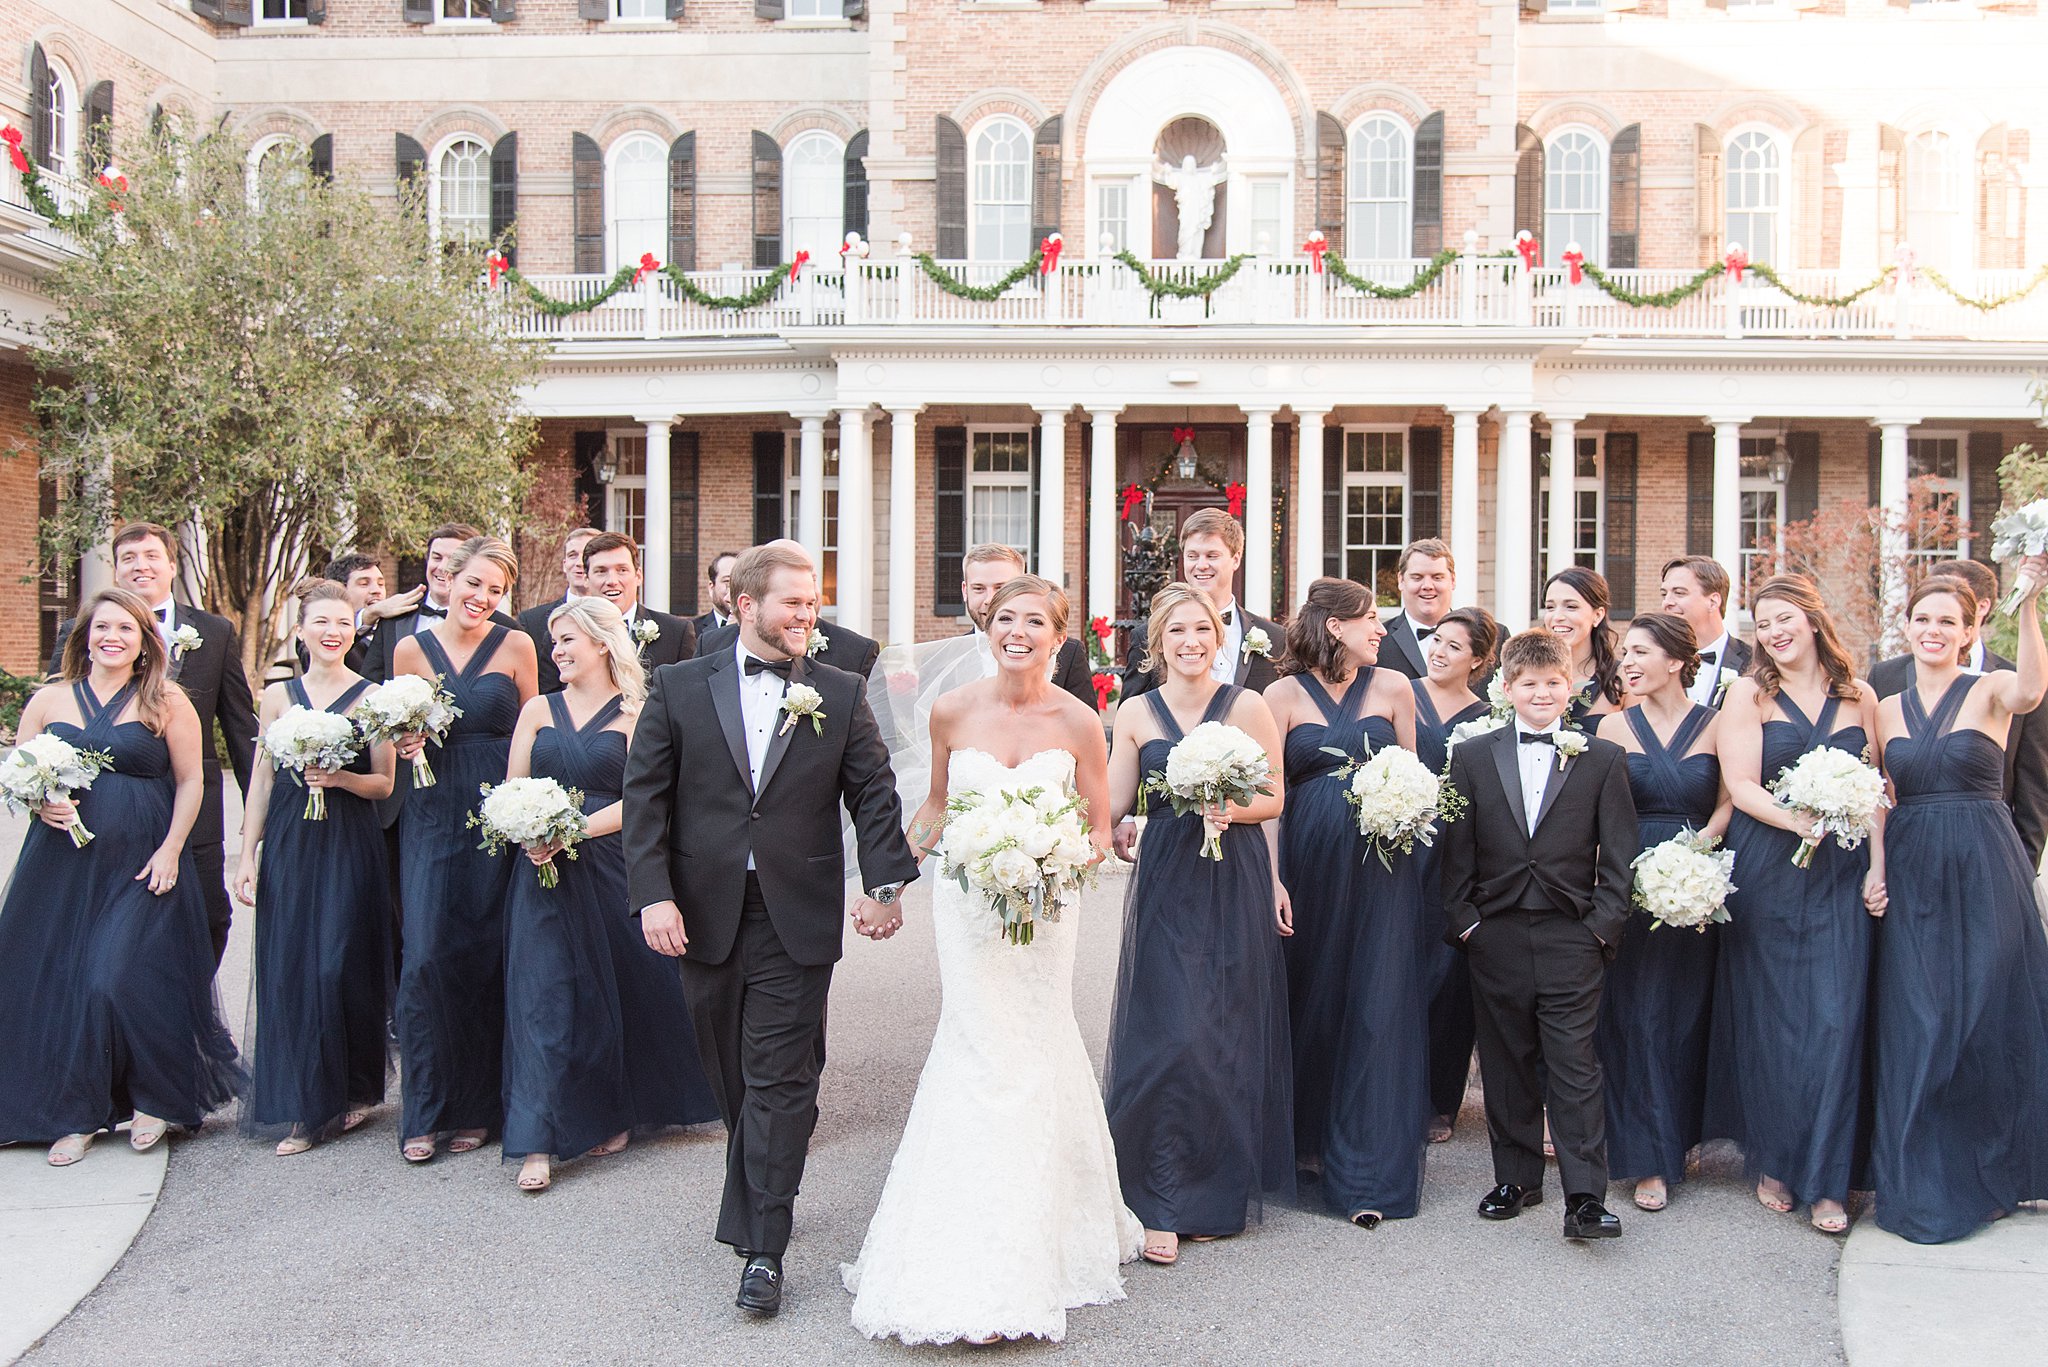 A bride and groom laugh while walking through a courtyard holding hands surrounded by their wedding party thanks to wedding planners Baltimore, MD